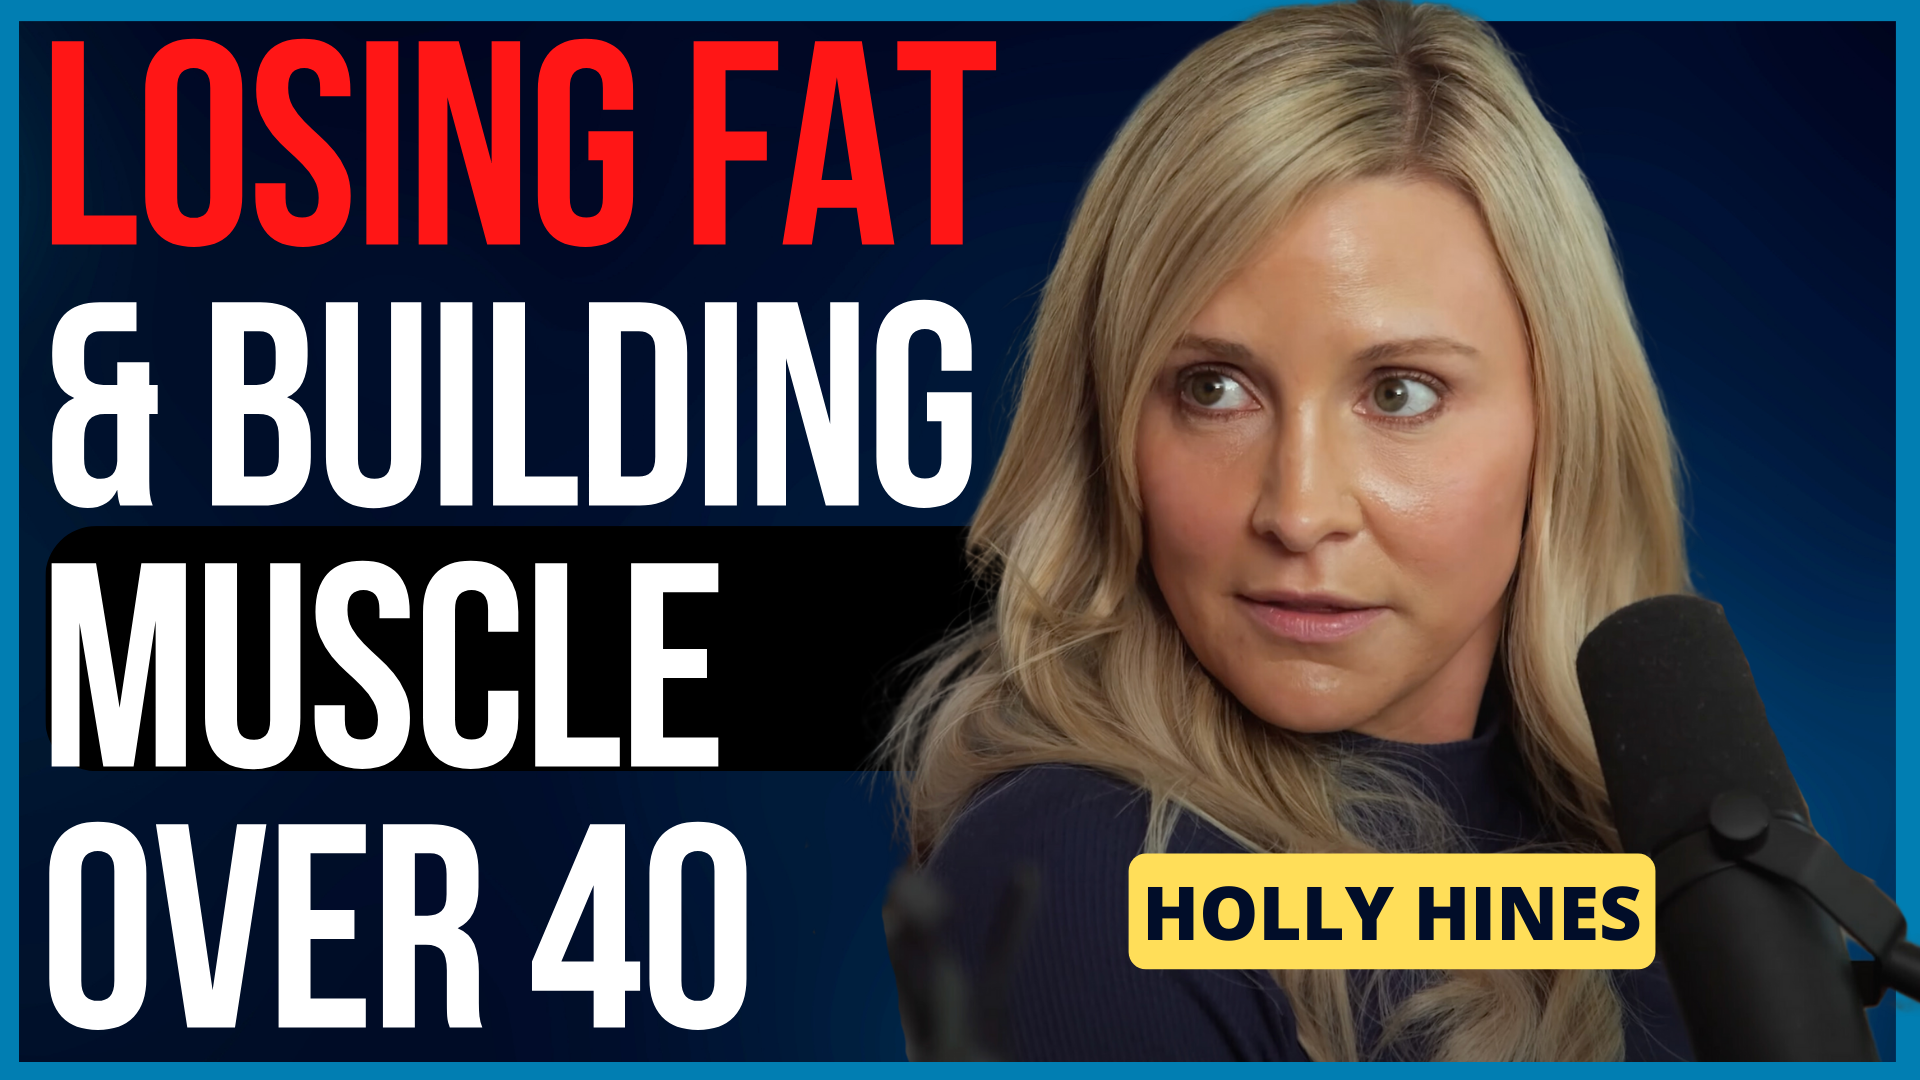 Losing Fat & Building Muscle Over 40 w/ Fitness Model Holly Hines